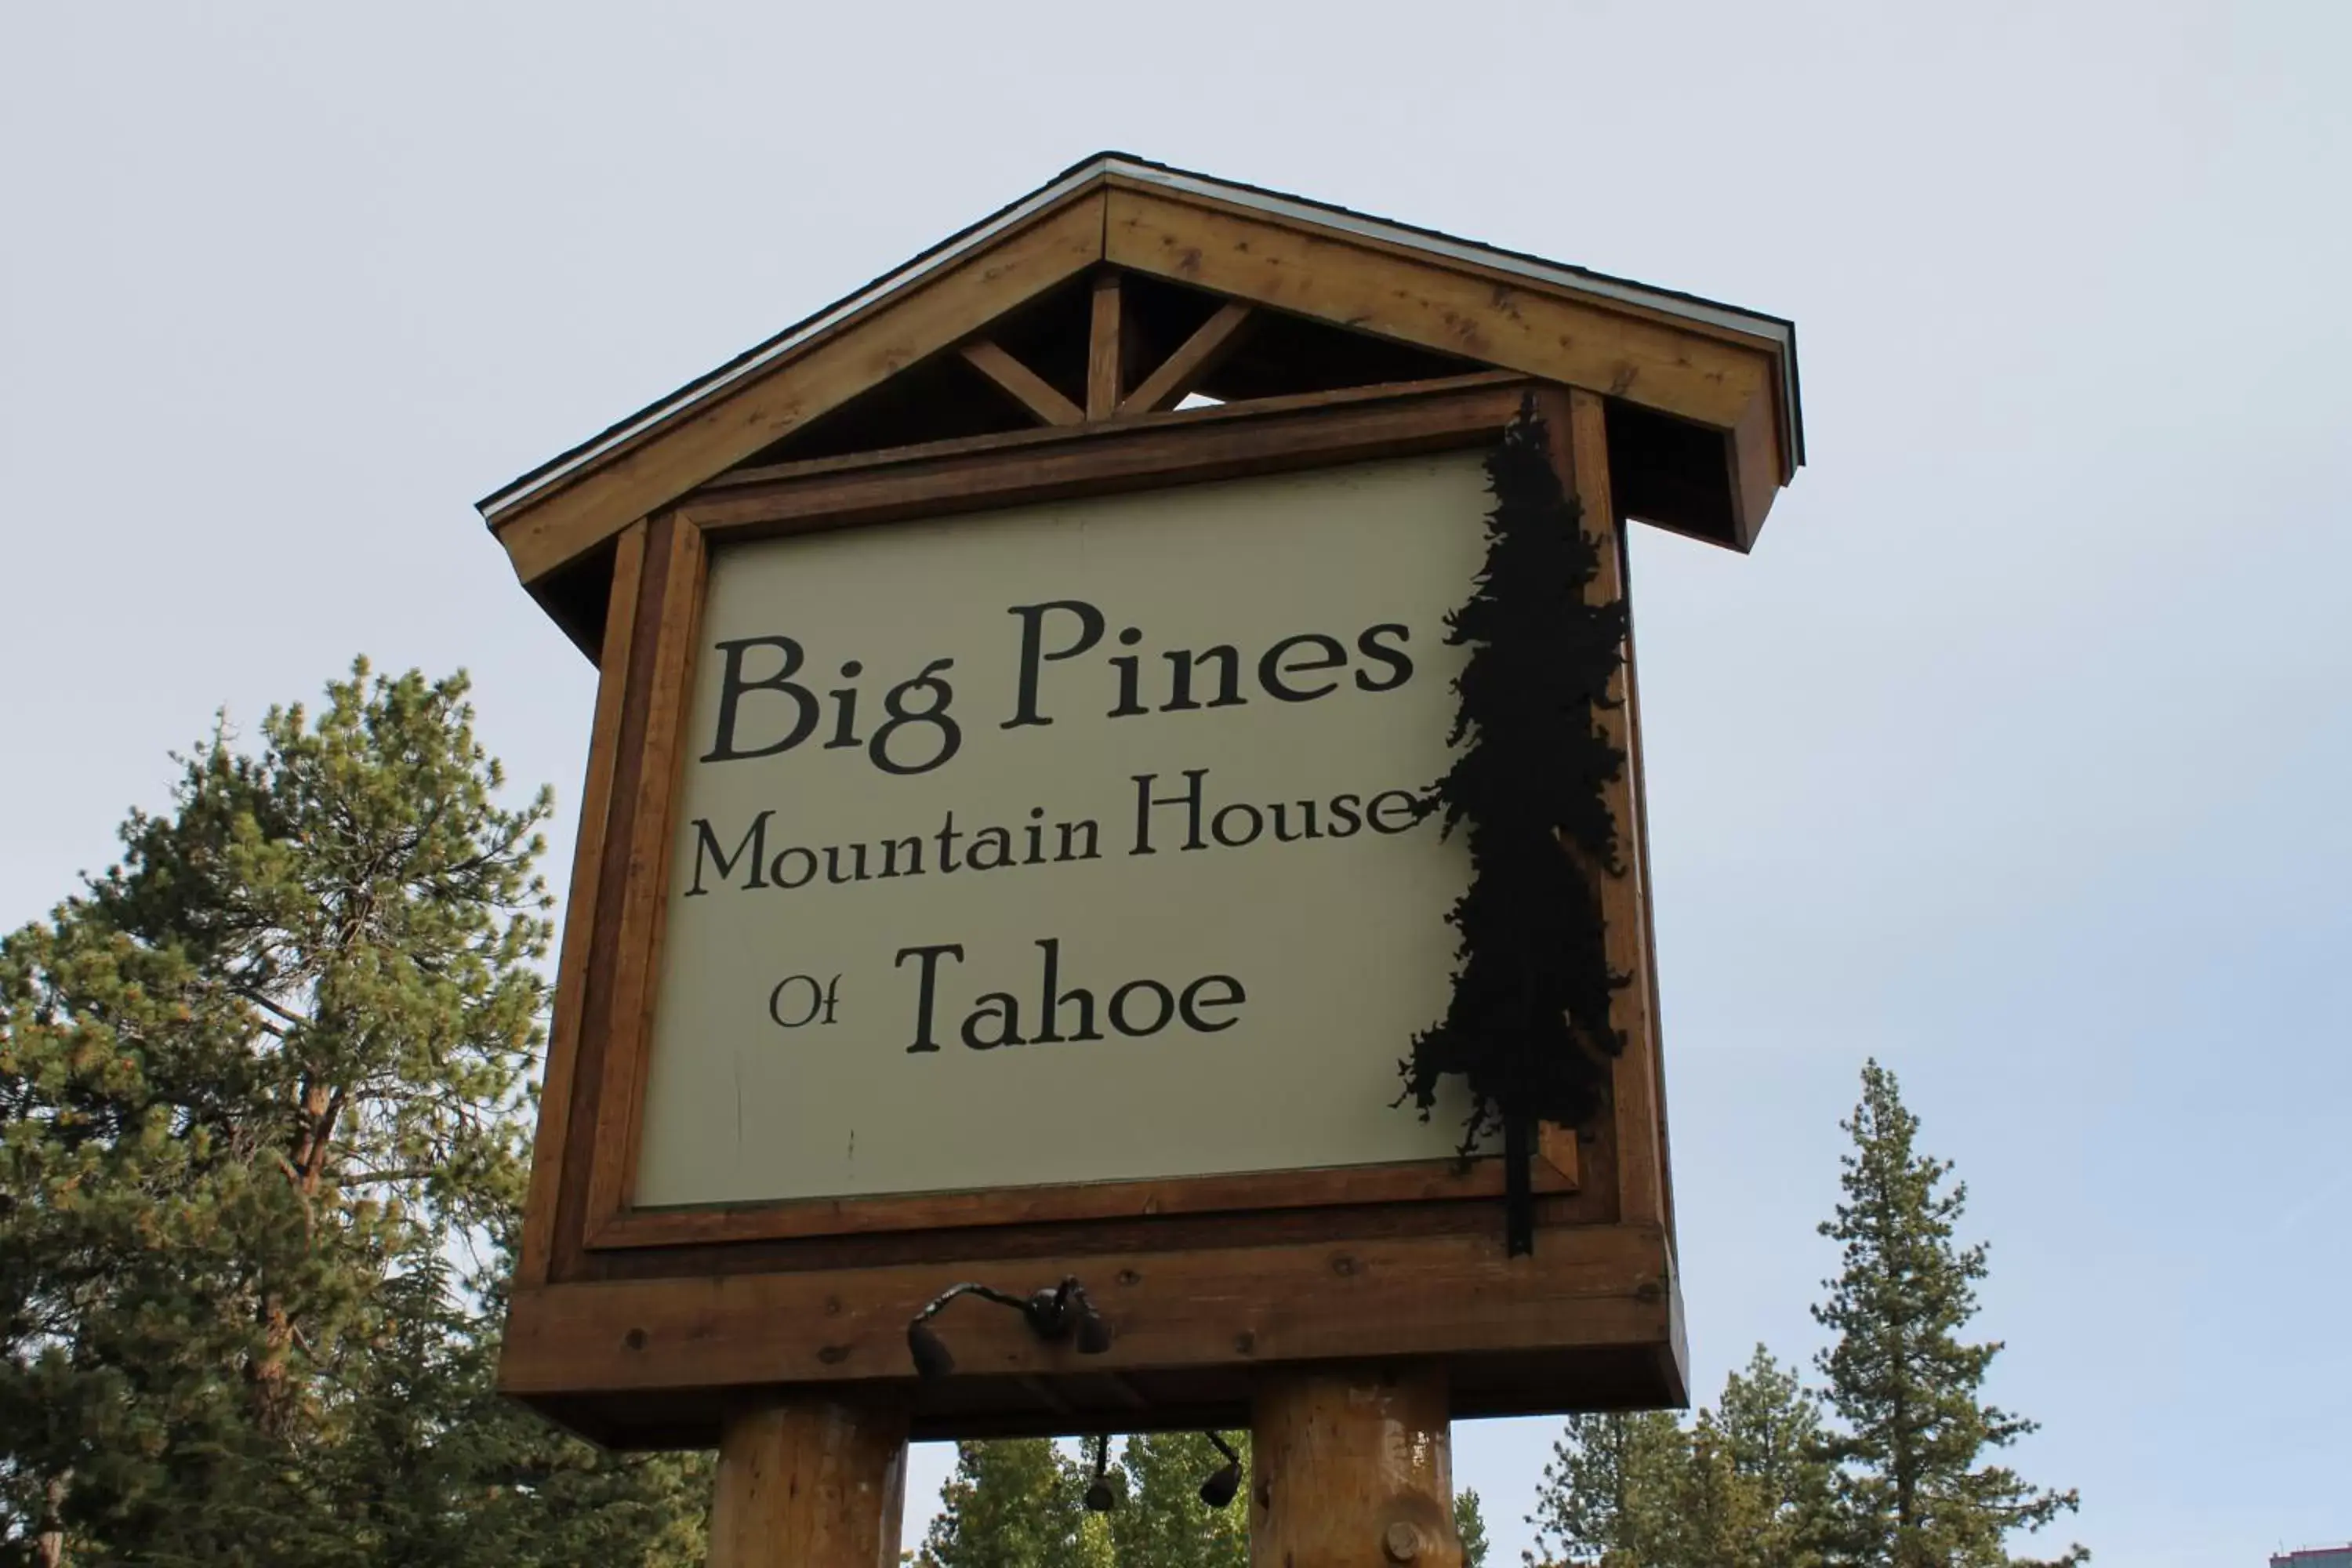 Property logo or sign, Logo/Certificate/Sign/Award in Big Pines Mountain House